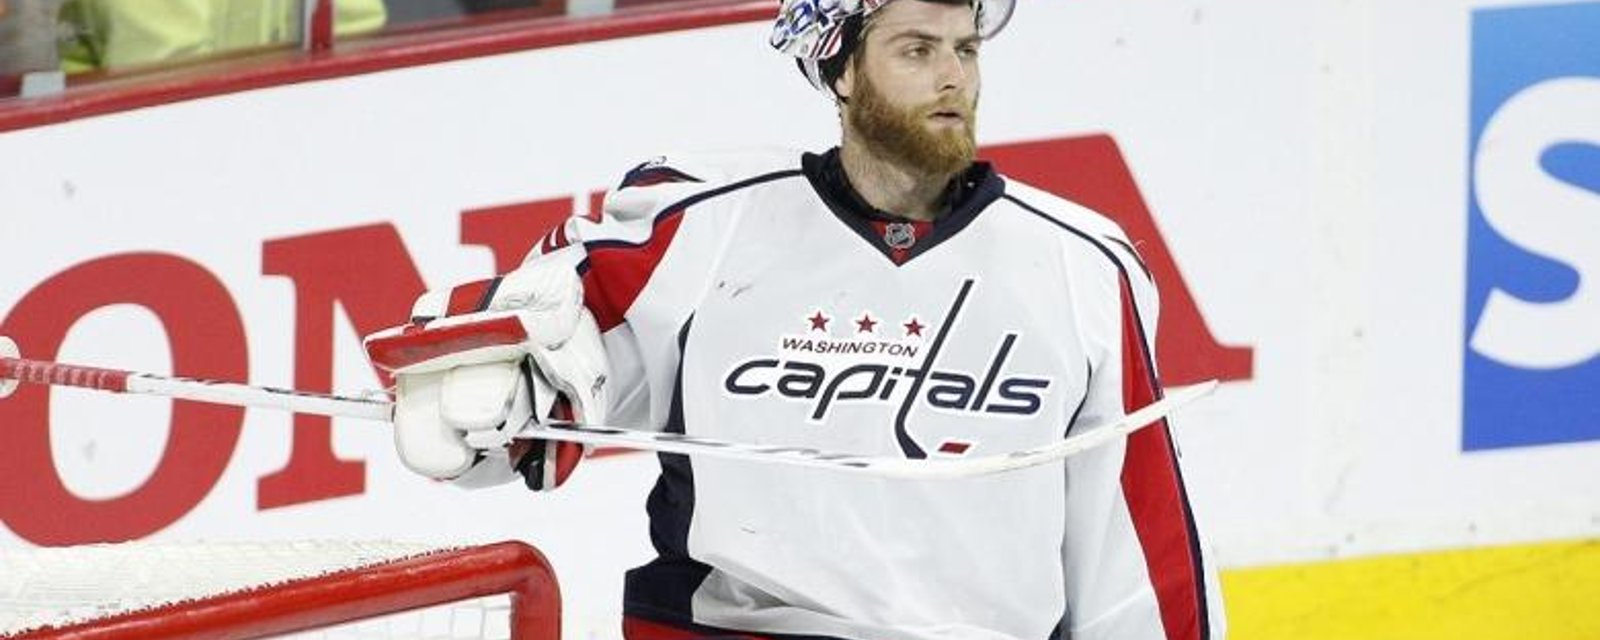 Breaking: Signs of trouble regarding the injury to star goaltender Braden Holtby?